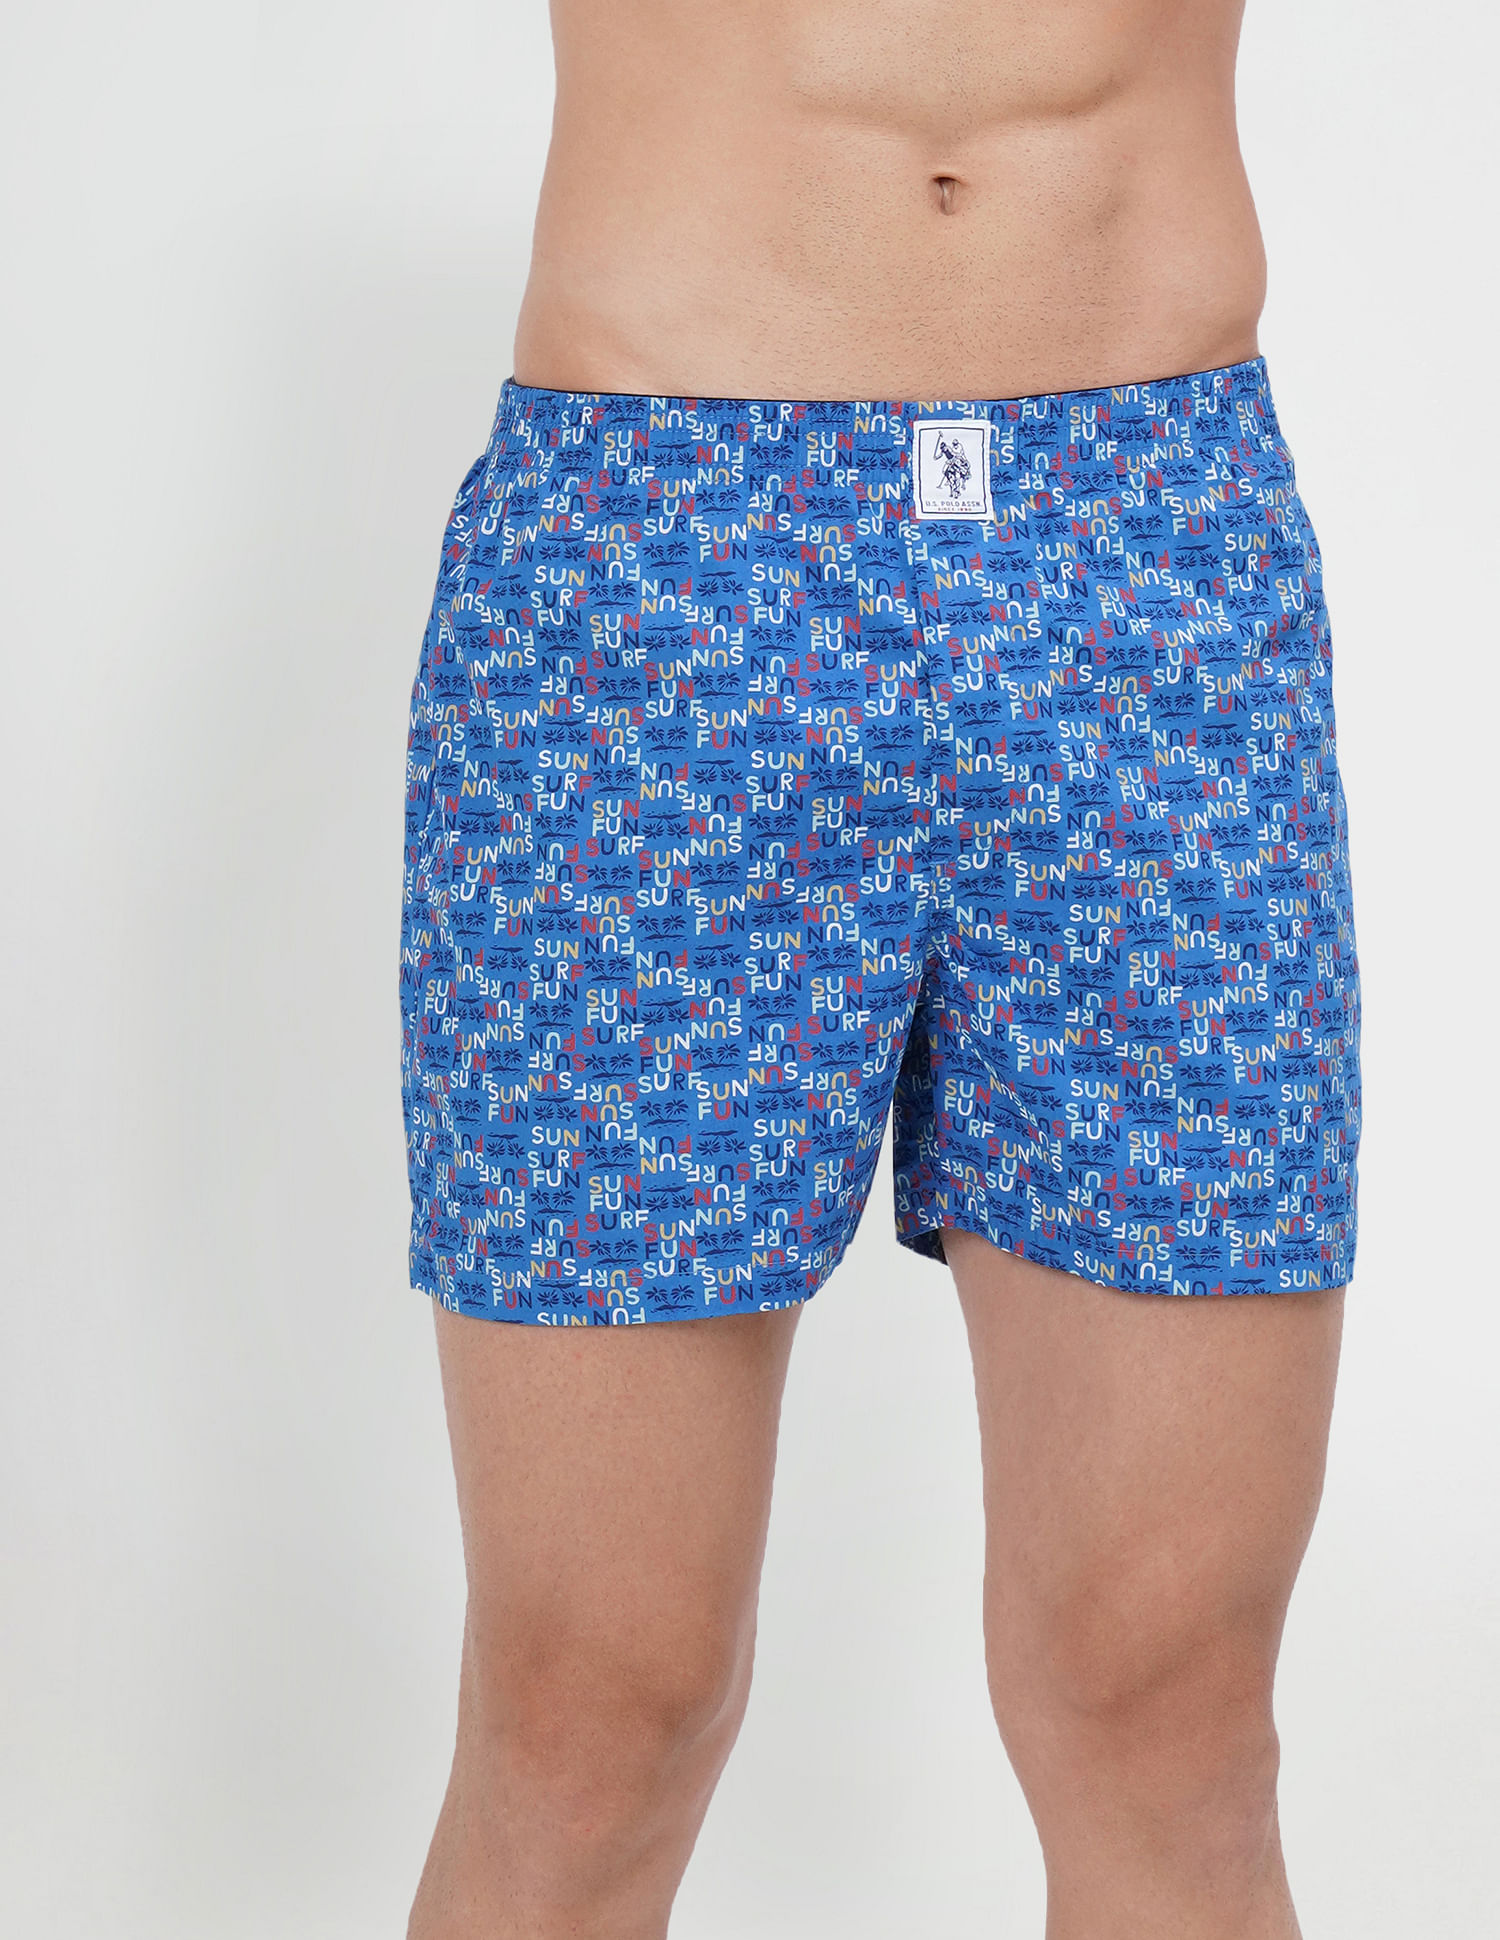 JOCKEY Printed Men Multicolor Boxer Shorts - Buy JOCKEY Printed Men  Multicolor Boxer Shorts Online at Best Prices in India